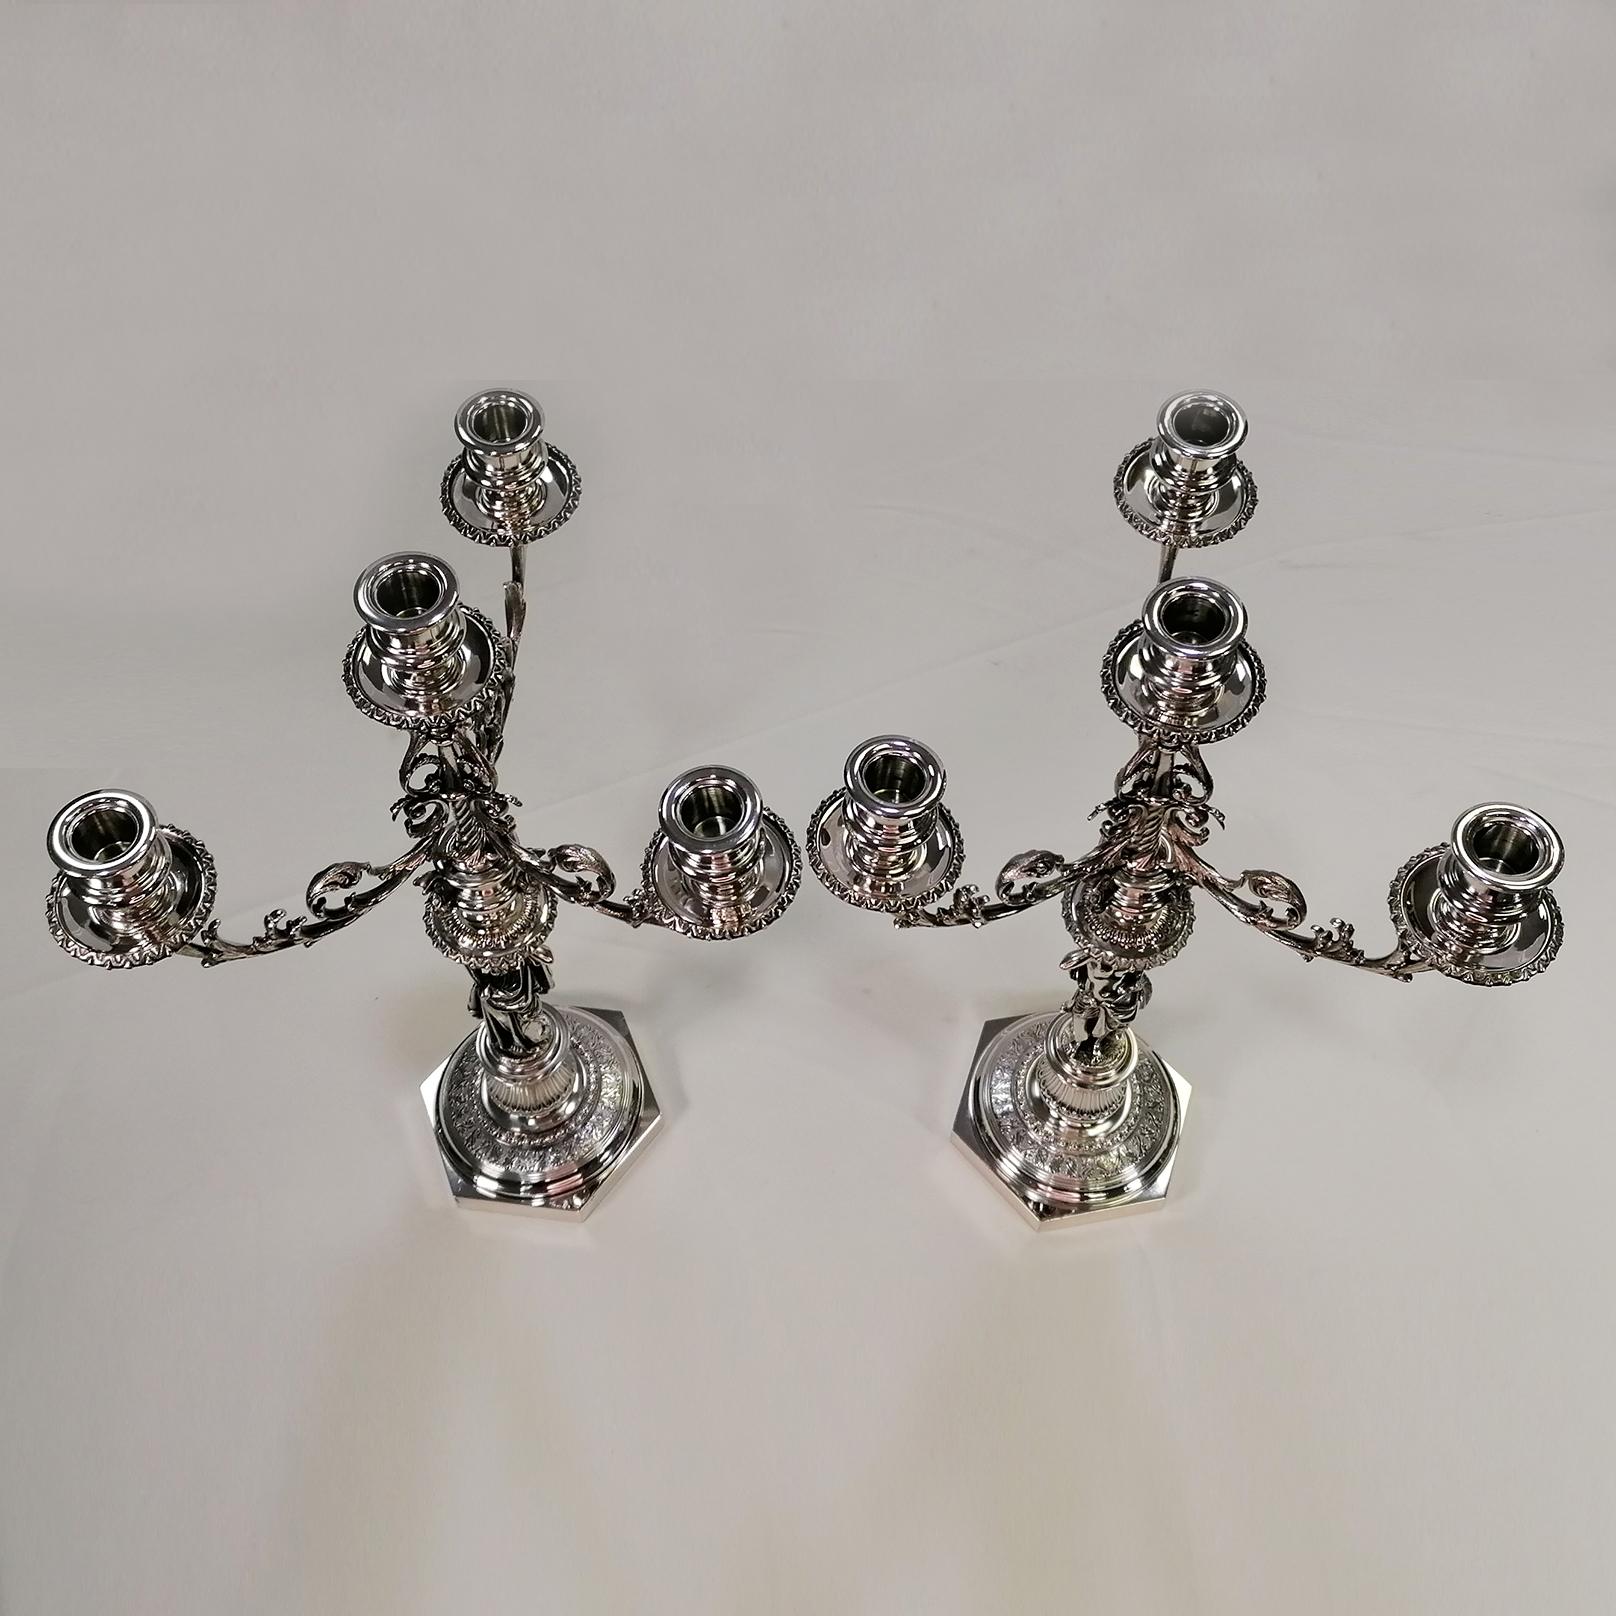 Forged XX Century Italian Solid Silver pair of Candelabras For Sale